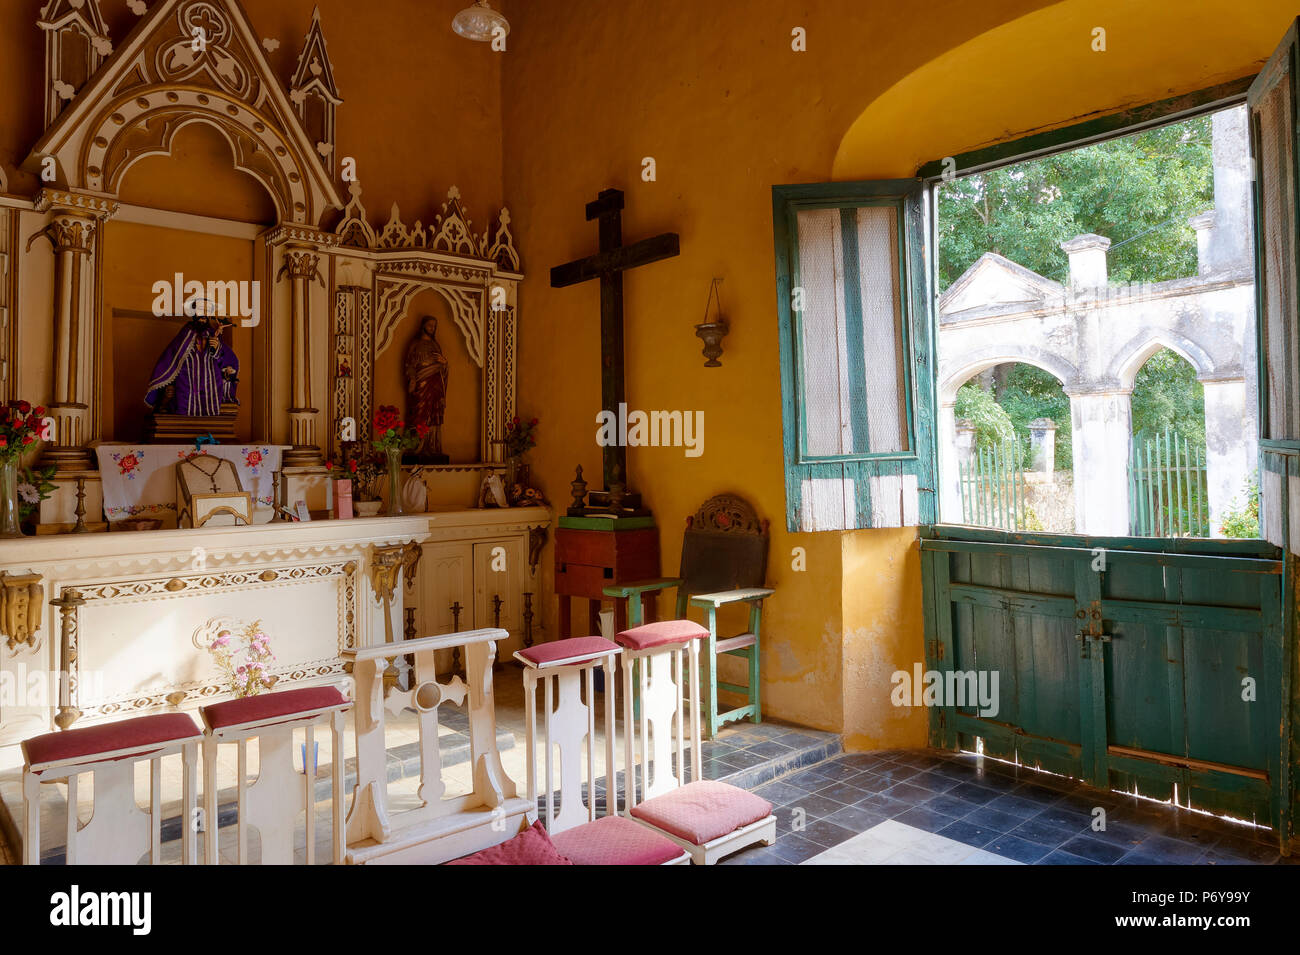 Chapel at Hacienda Yaxcopoil, a 17th century henequen plantation near Merida, Yucatan, Mexico, now a museum, guest house and events venue. Stock Photo